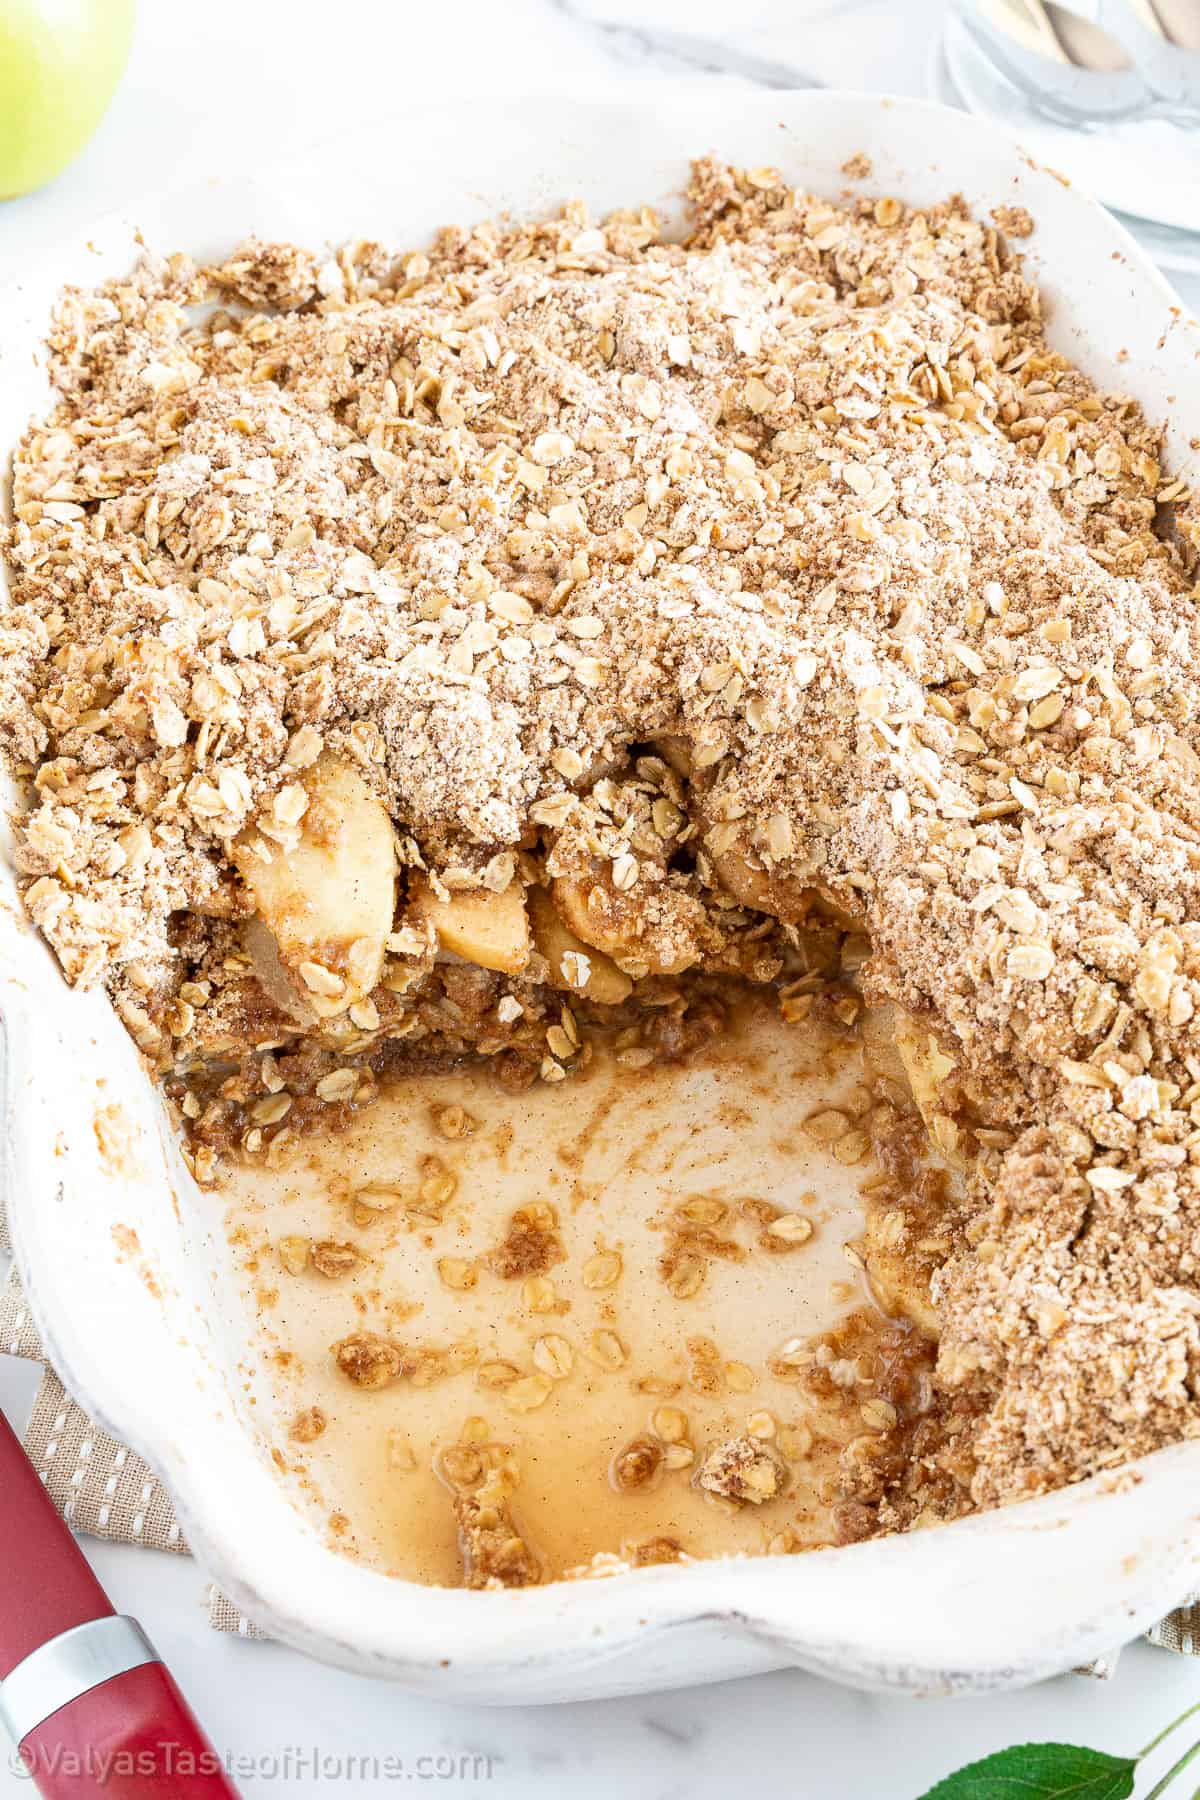 An Apple Crisp is a delicious traditional and classic dessert that is made with a streusel topping and has an apple filling.